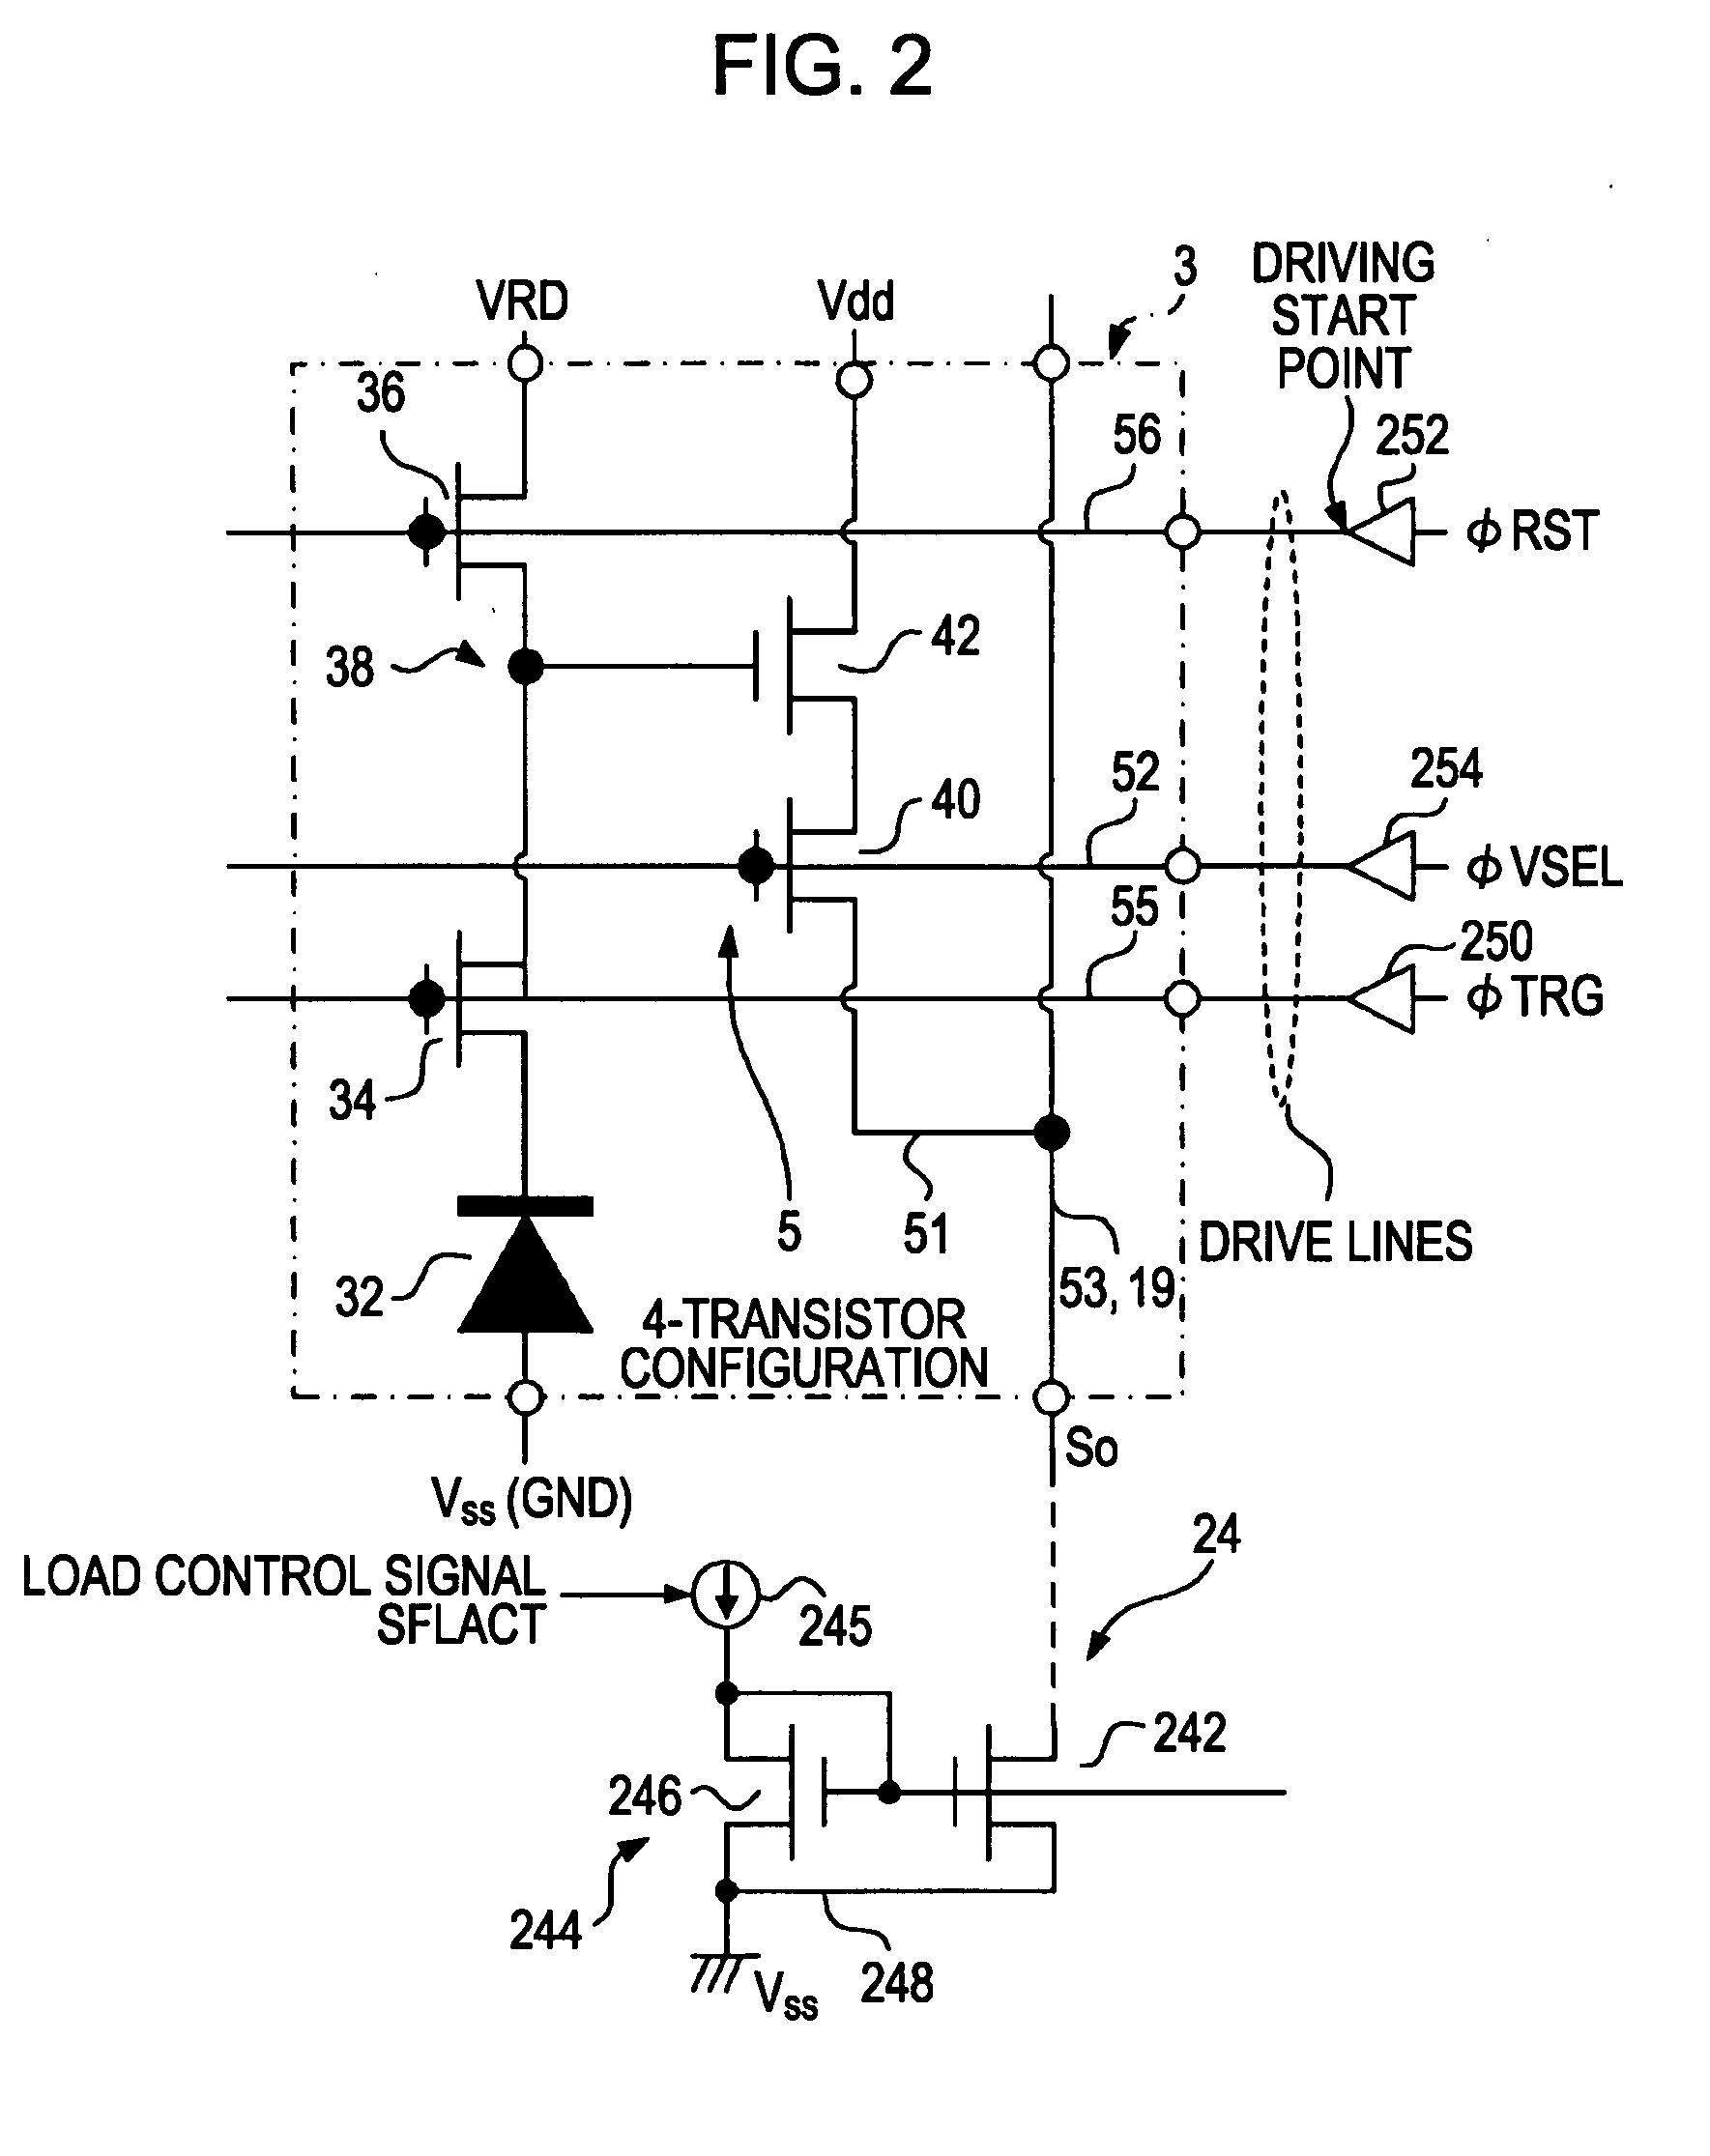 Solid-state image sensor and image capturing apparatus